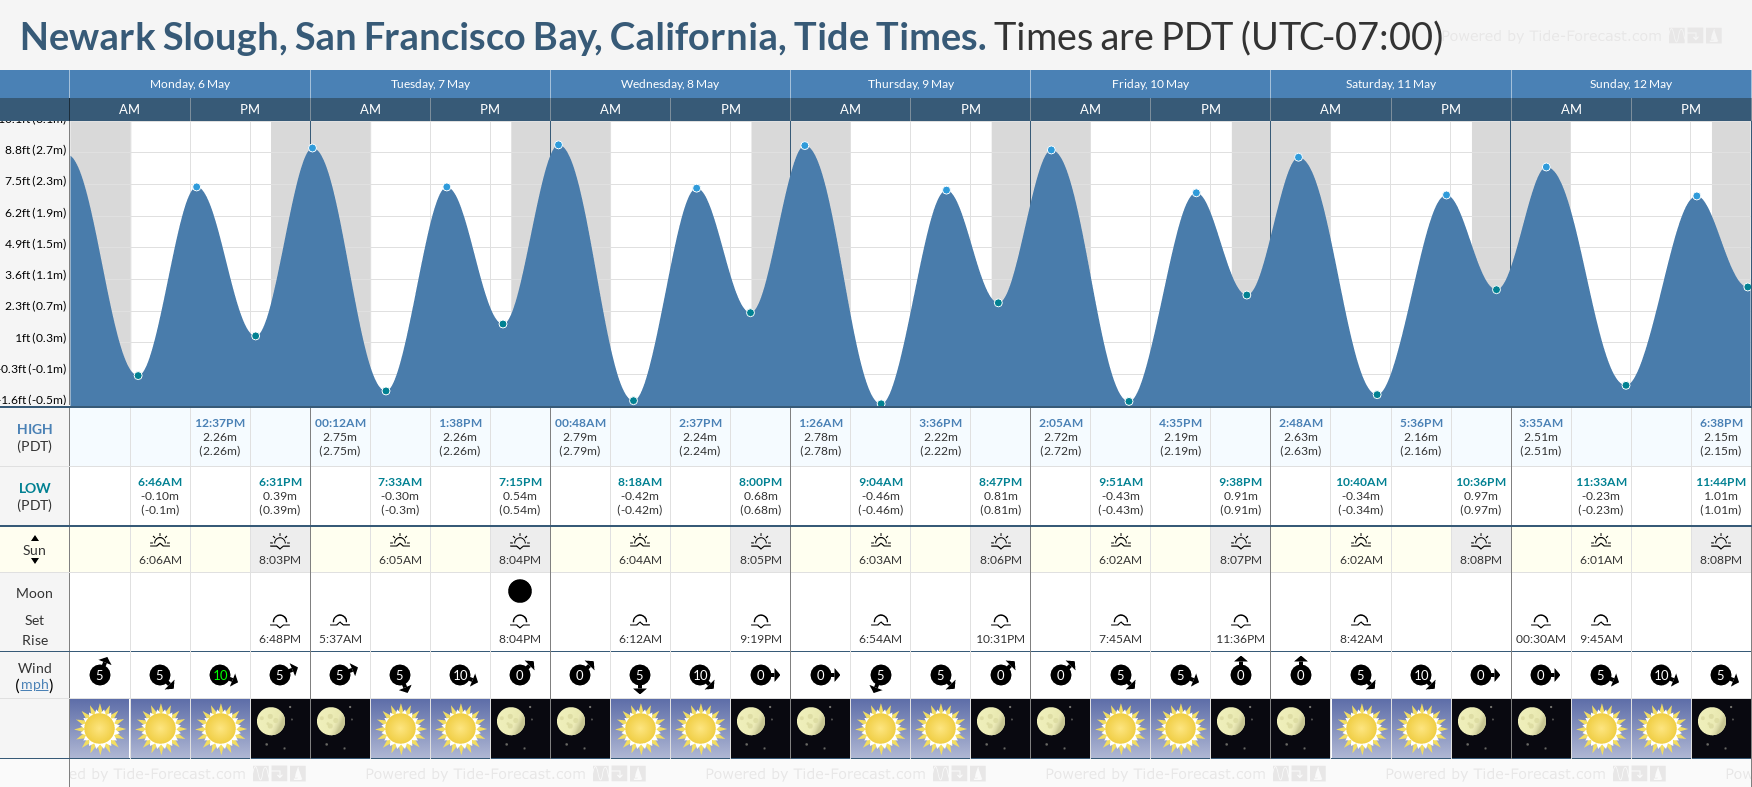 Newark Slough, San Francisco Bay, California Tide Chart including high and low tide tide times for the next 7 days